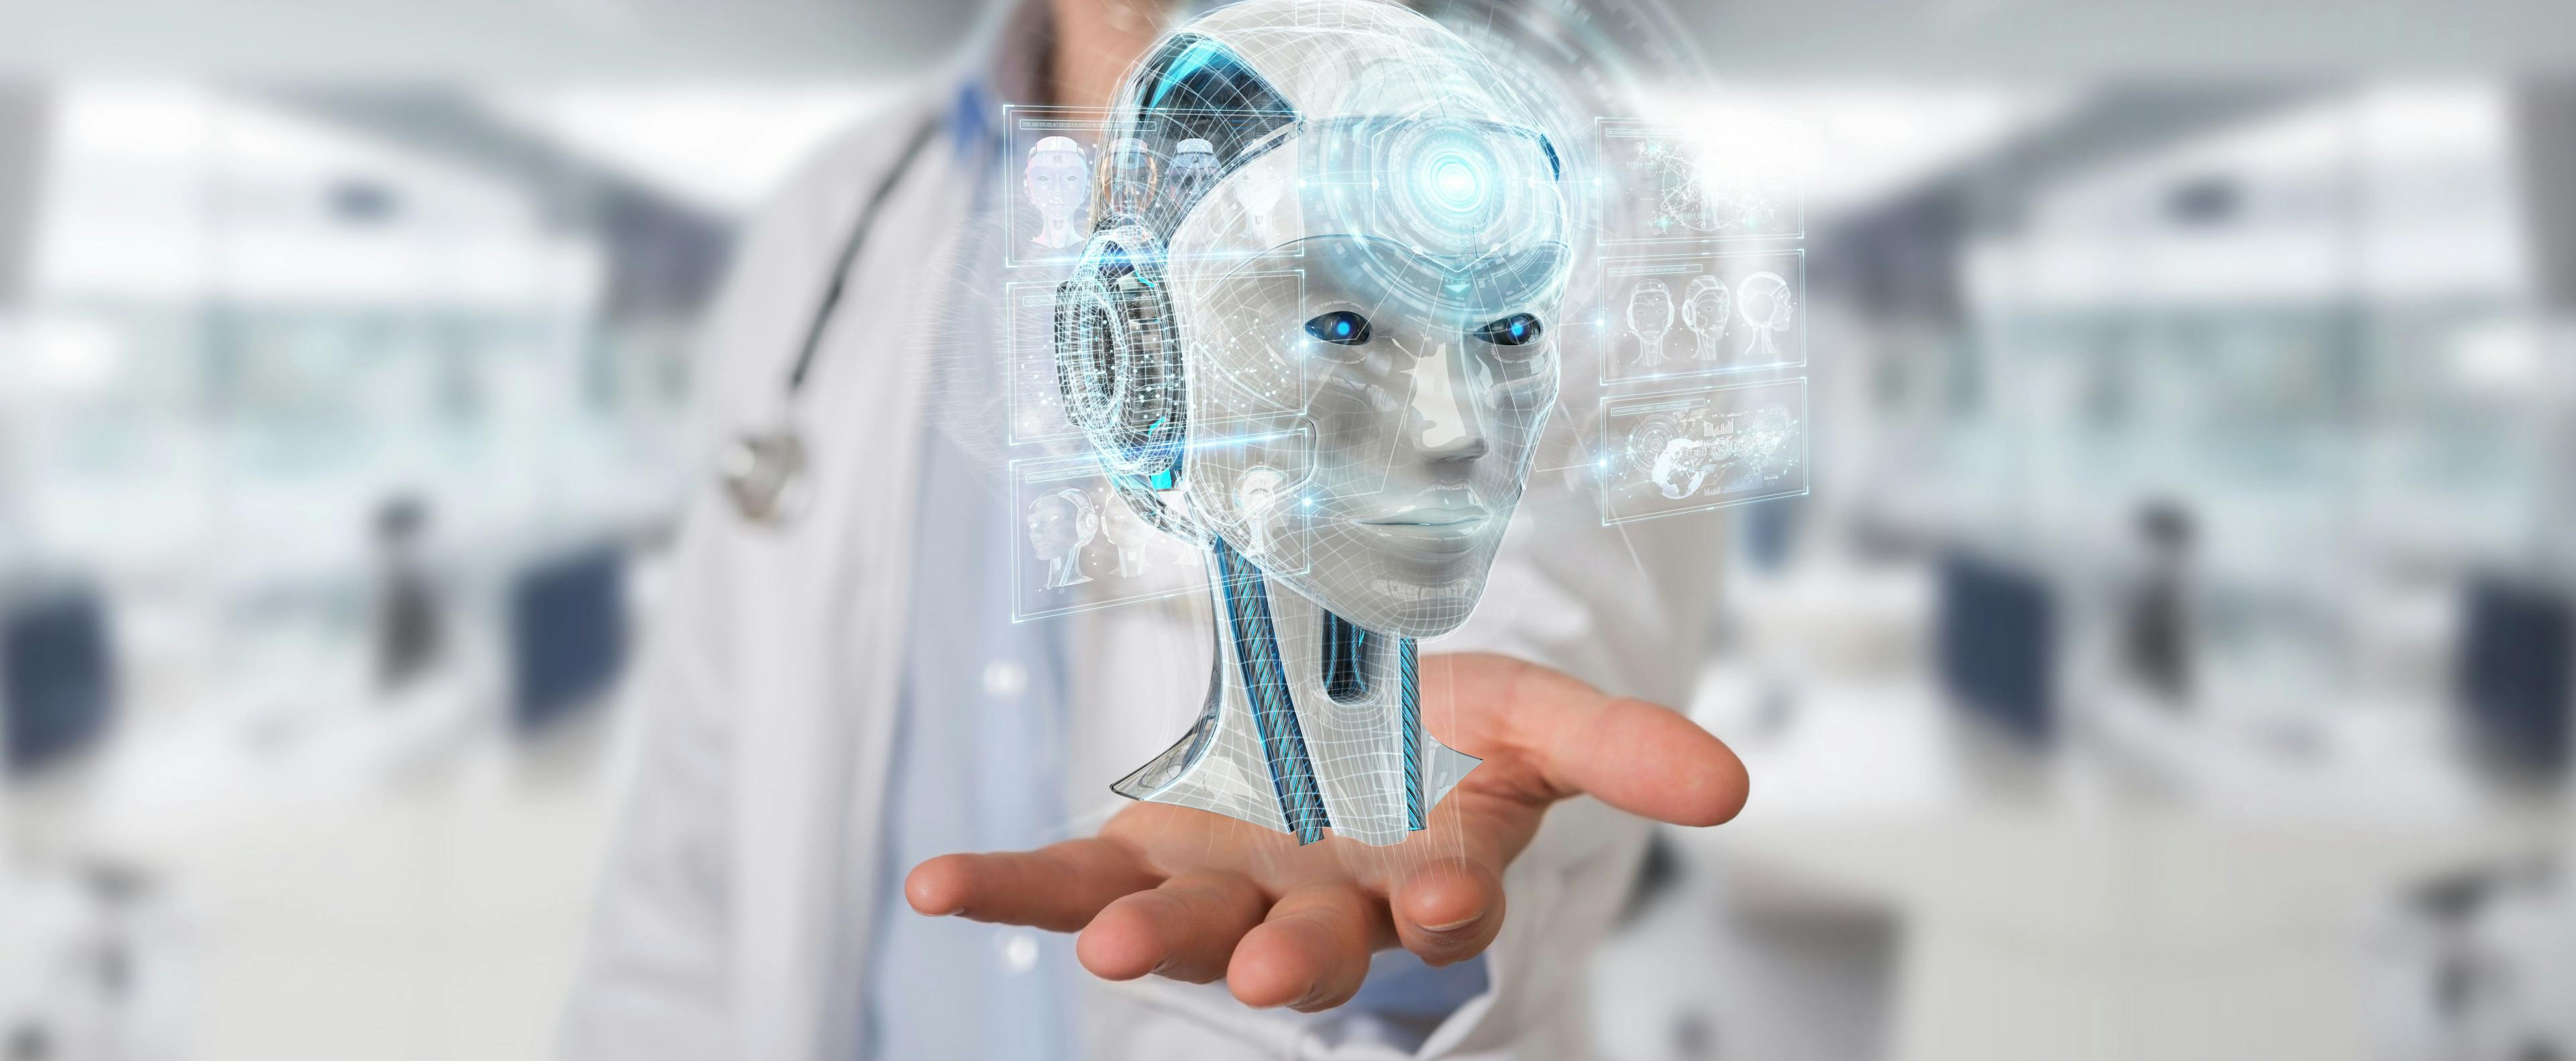 The promise of AI in healthcare